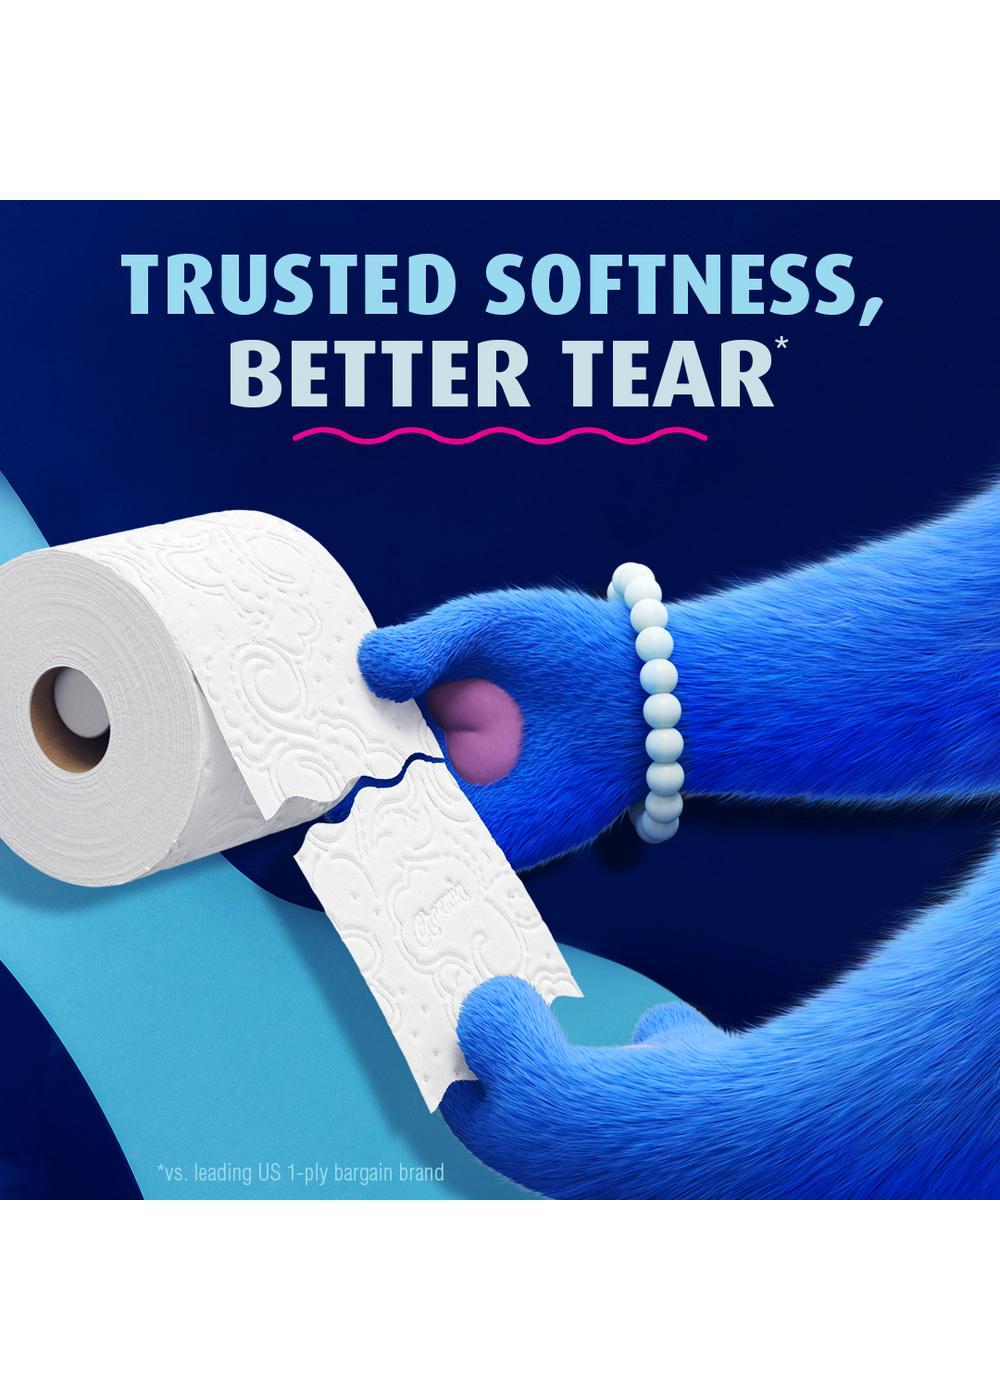 Charmin Ultra Soft Toilet Paper; image 13 of 20